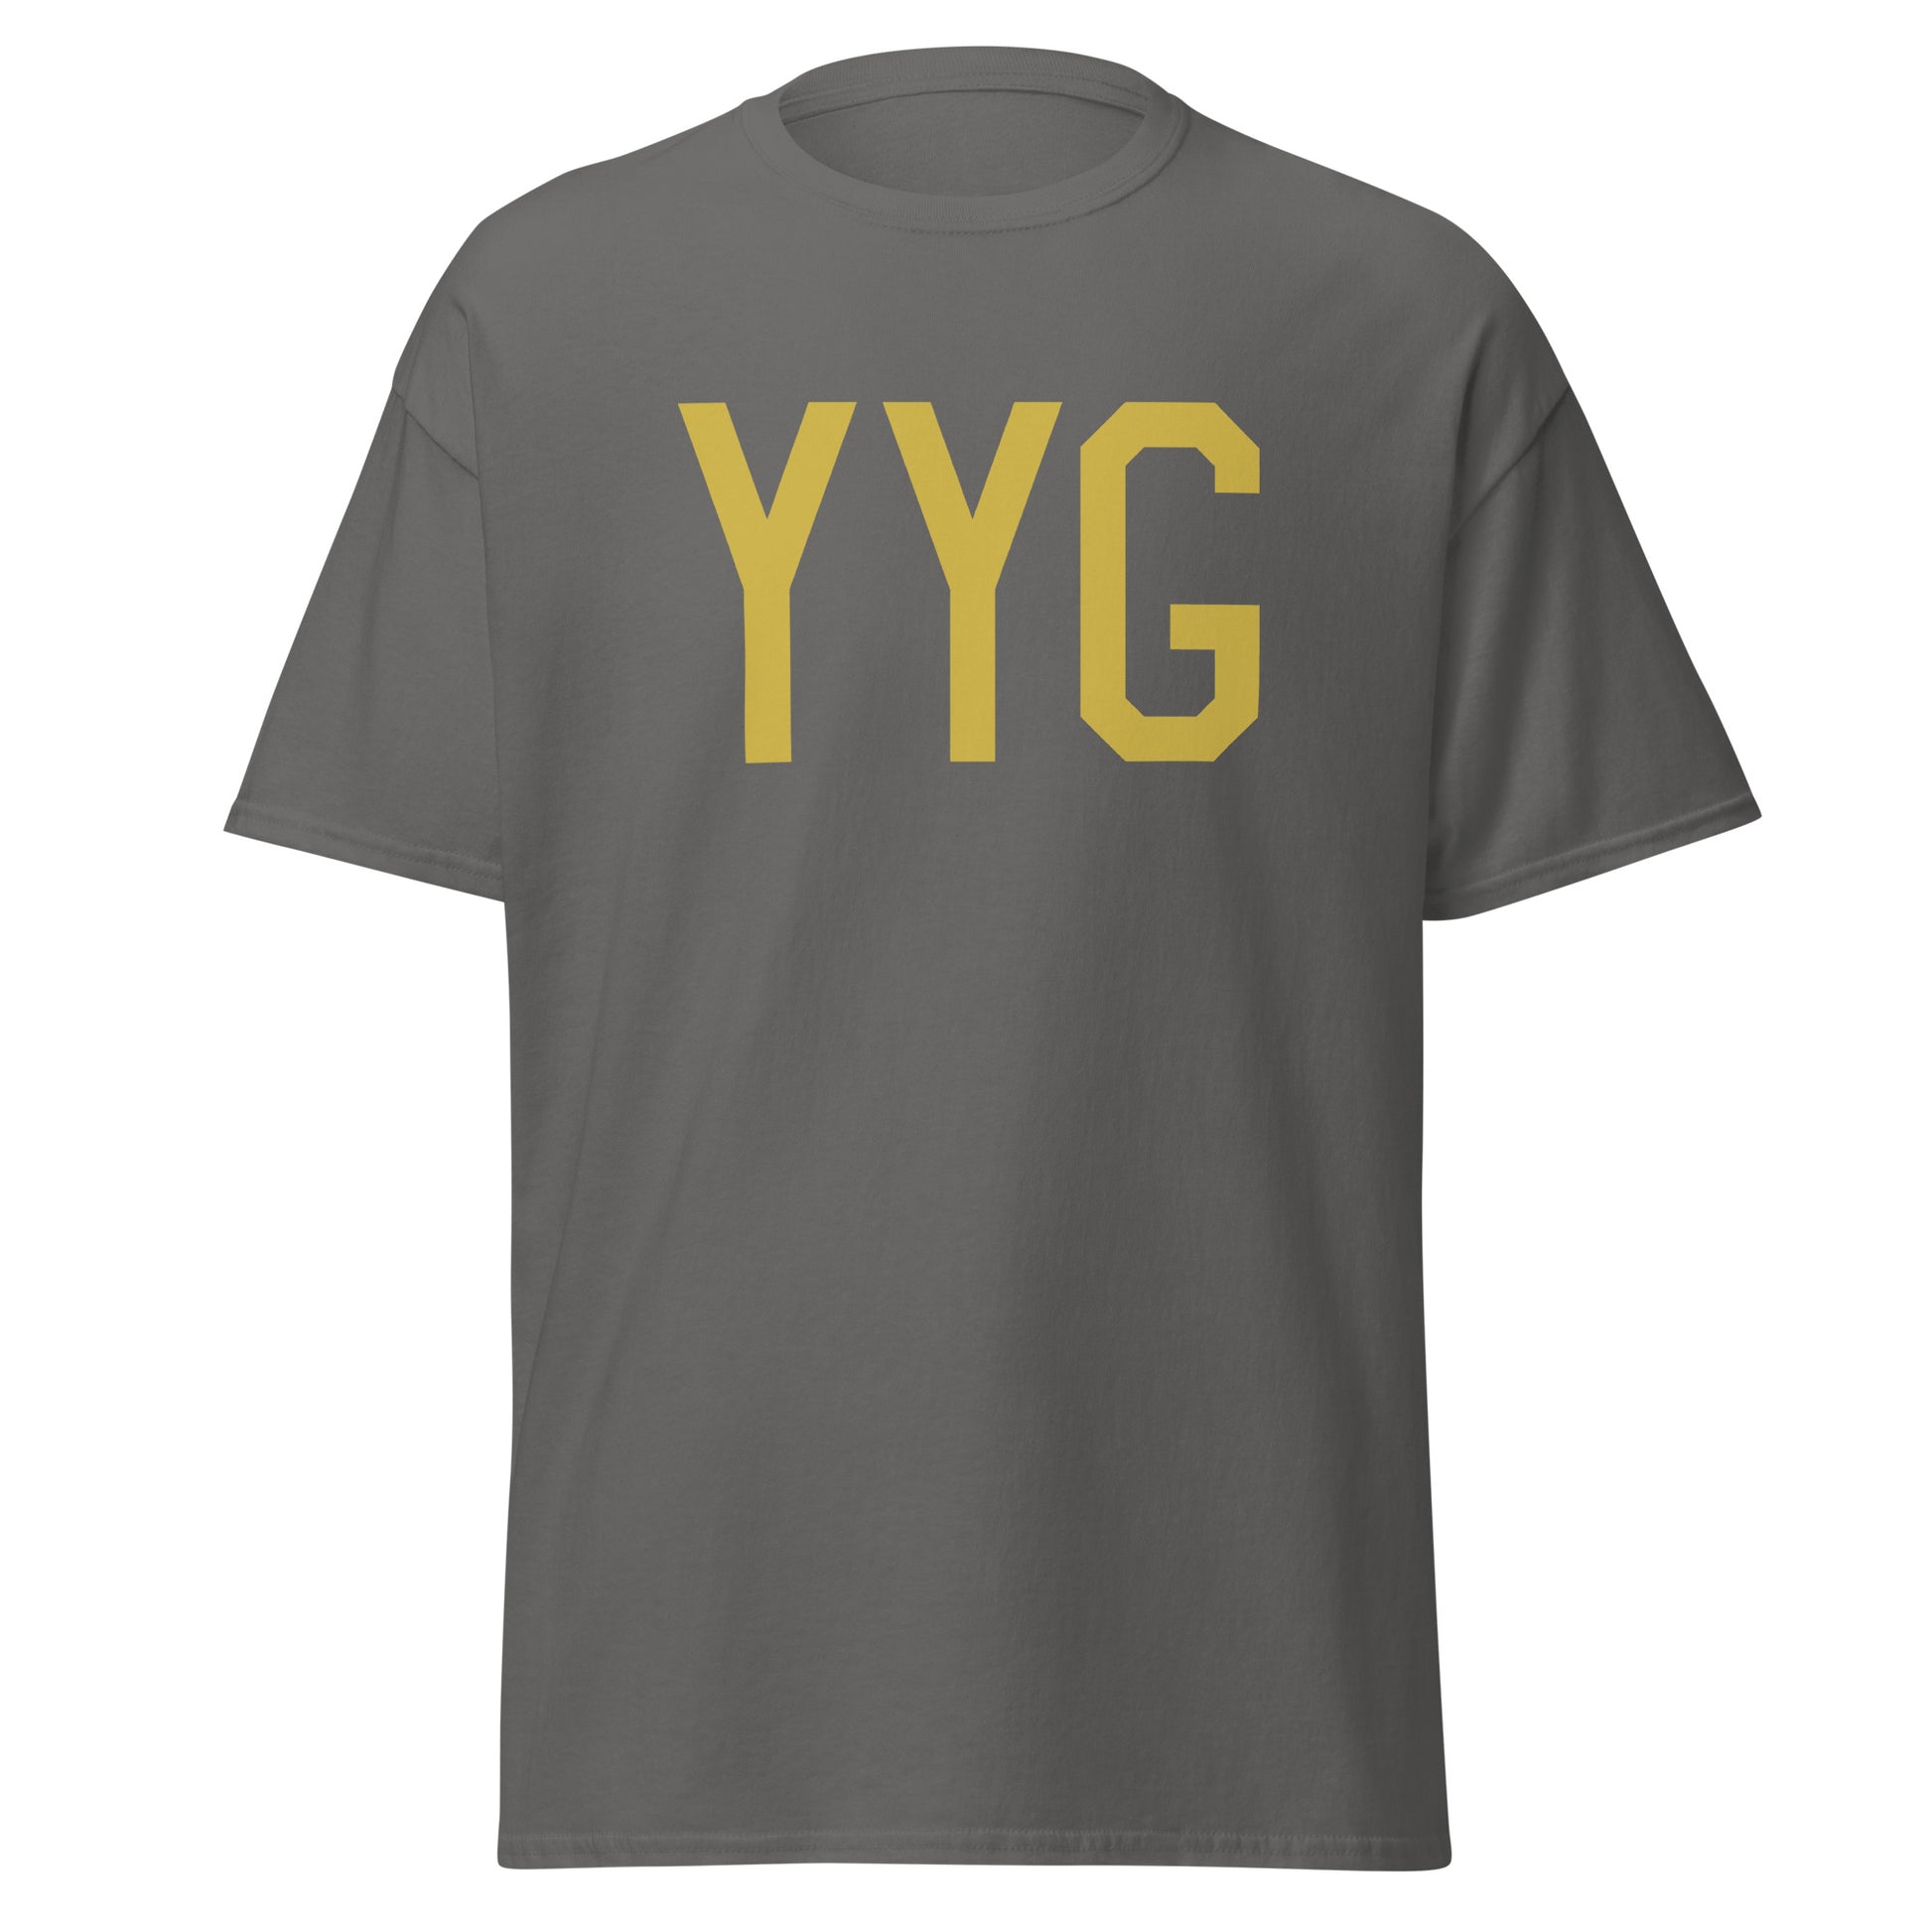 Aviation Enthusiast Men's Tee - Old Gold Graphic • YYG Charlottetown • YHM Designs - Image 05